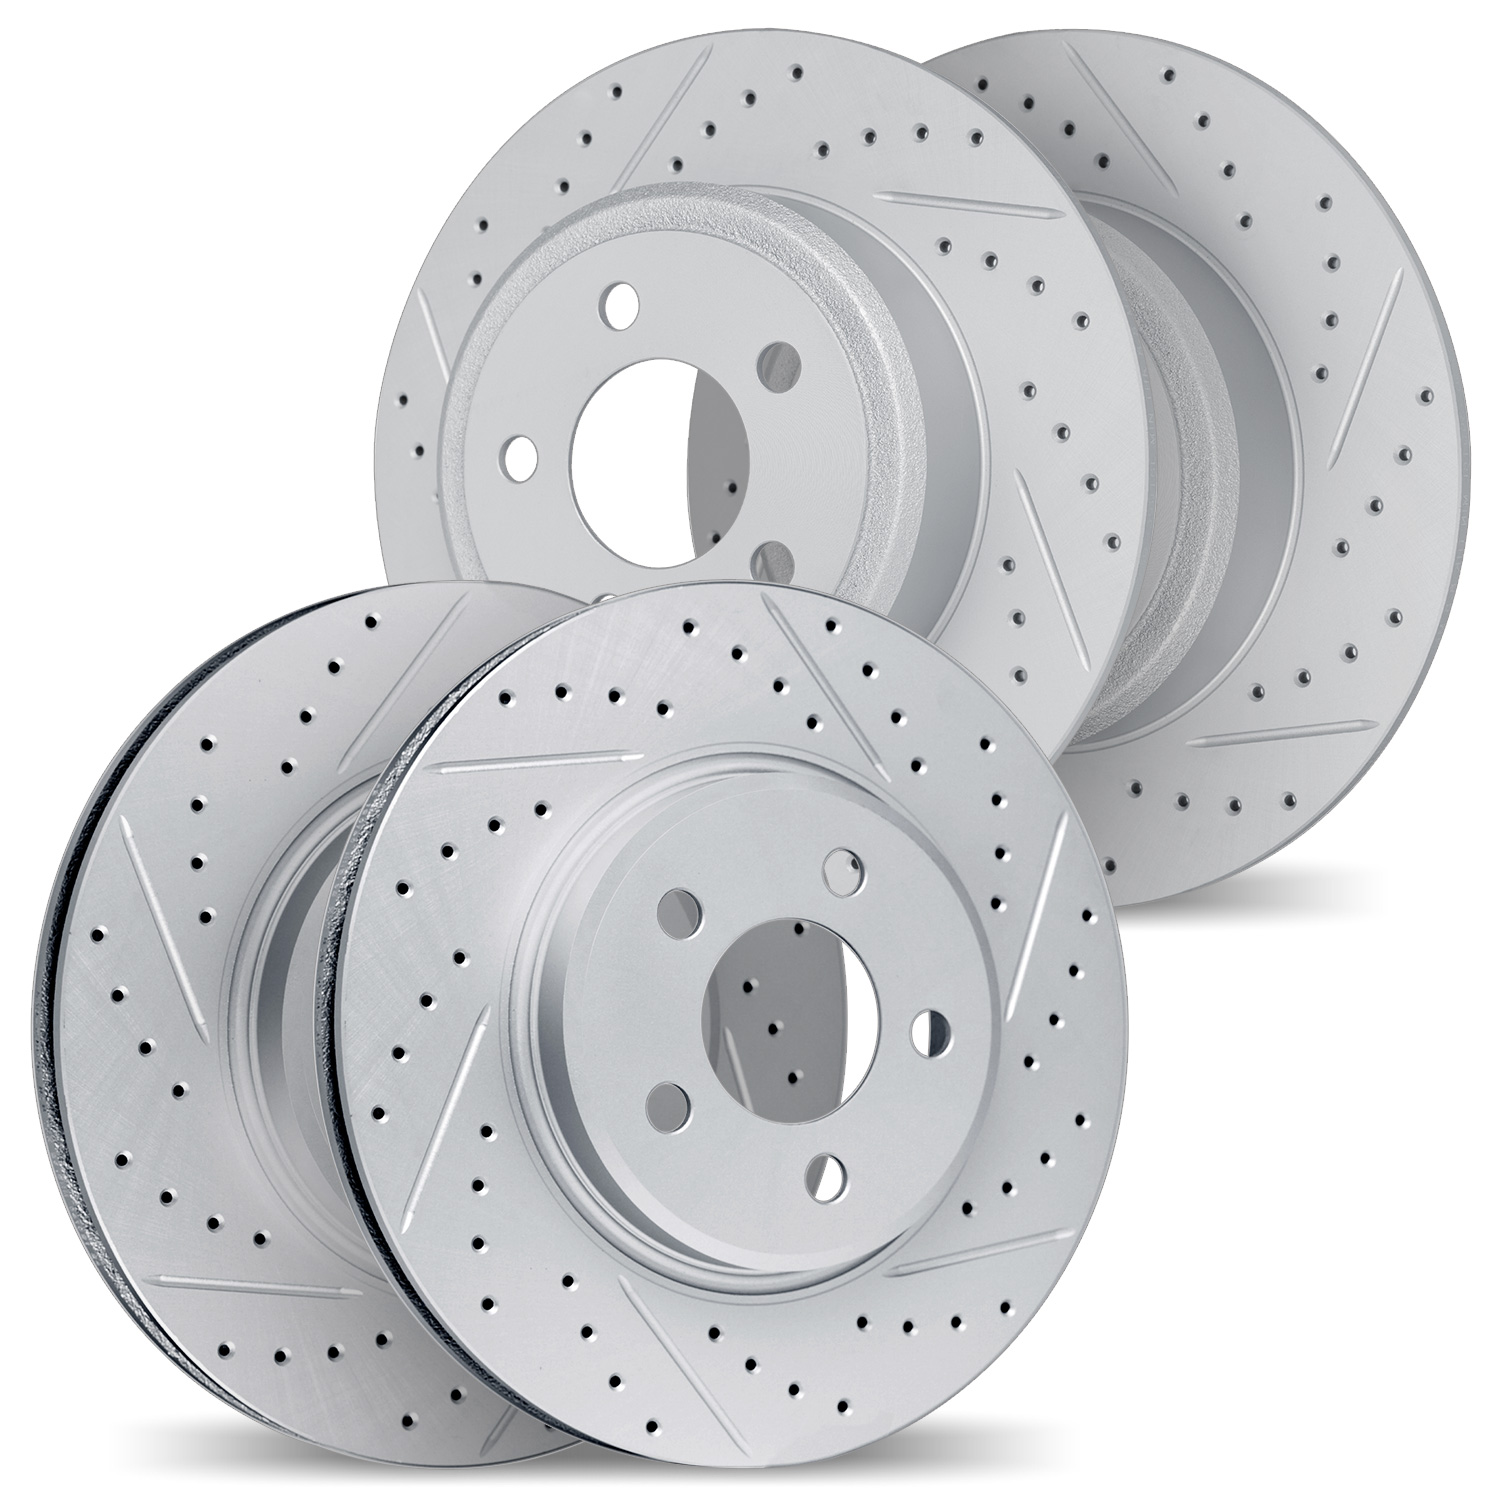 2004-03058 Geoperformance Drilled/Slotted Brake Rotors, 2007-2012 Kia/Hyundai/Genesis, Position: Front and Rear